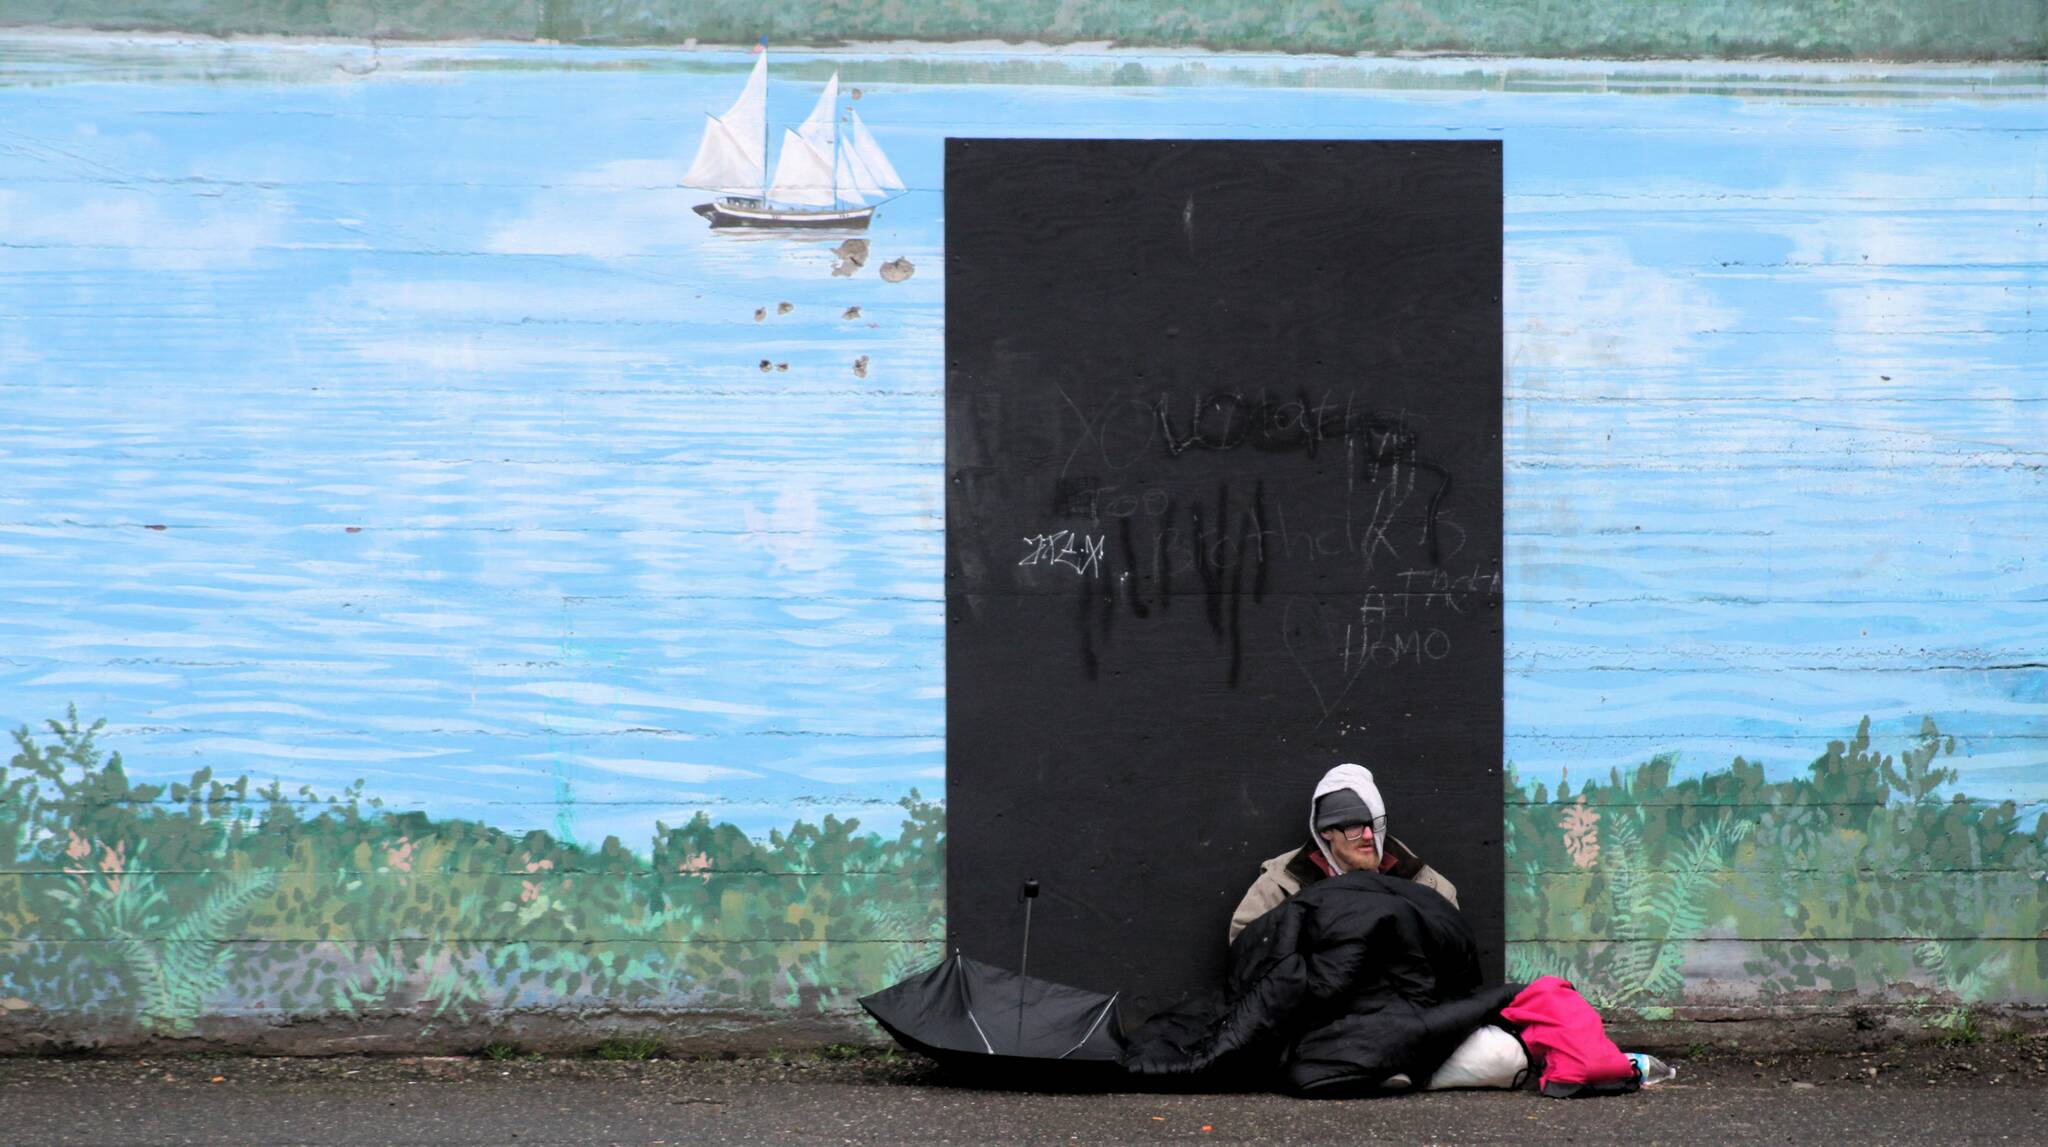 Elisha Meyer/Kitsap News Group Photos
A homeless man sits against the wall of the Kitsap Rescue Mission building on 6th Street.